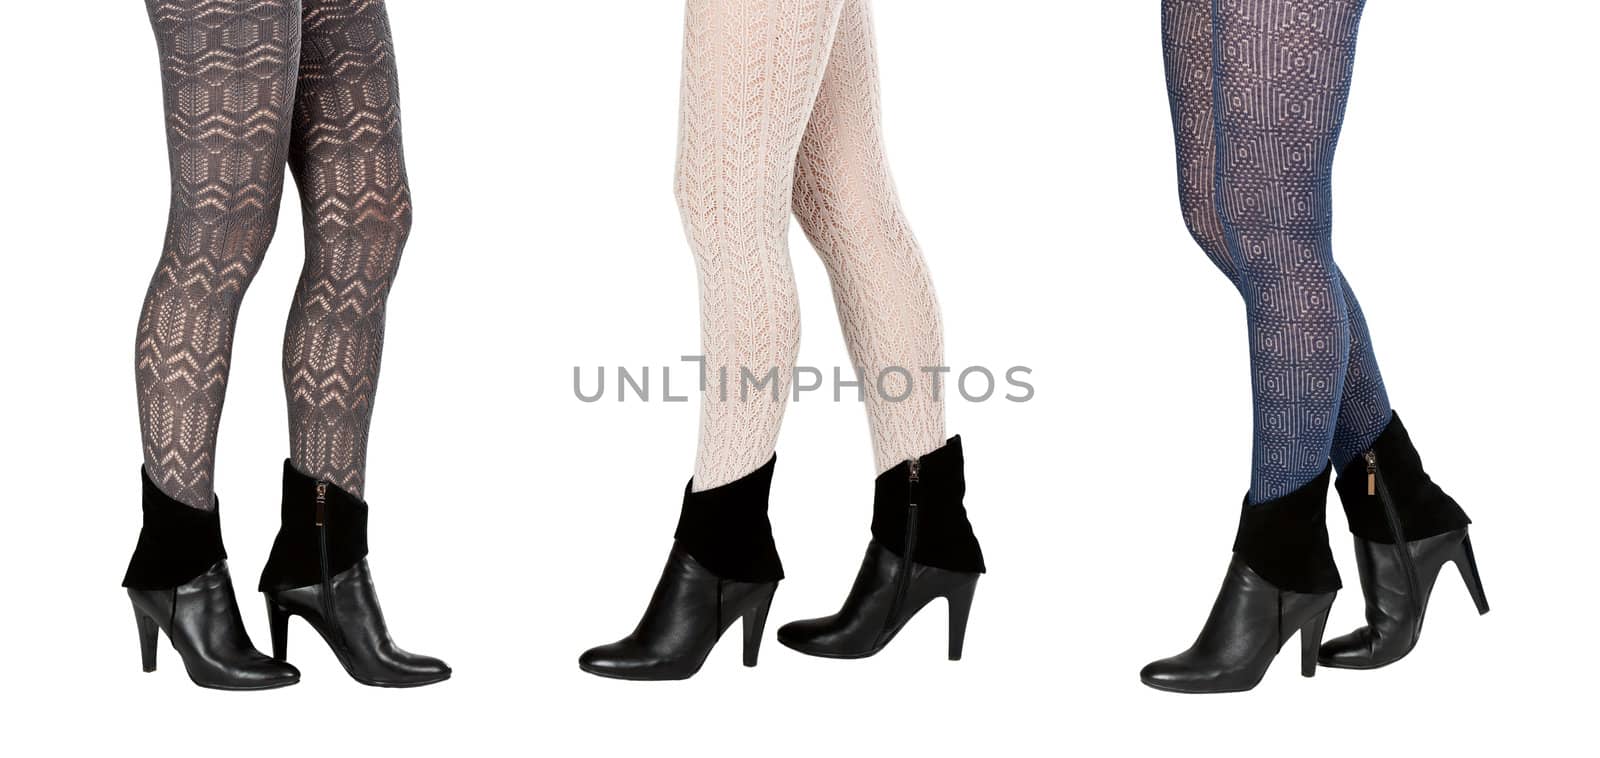 A collage made up of three pairs of female legs in pantyhose and boots isolated on a white background. The image is composed of several photographs.